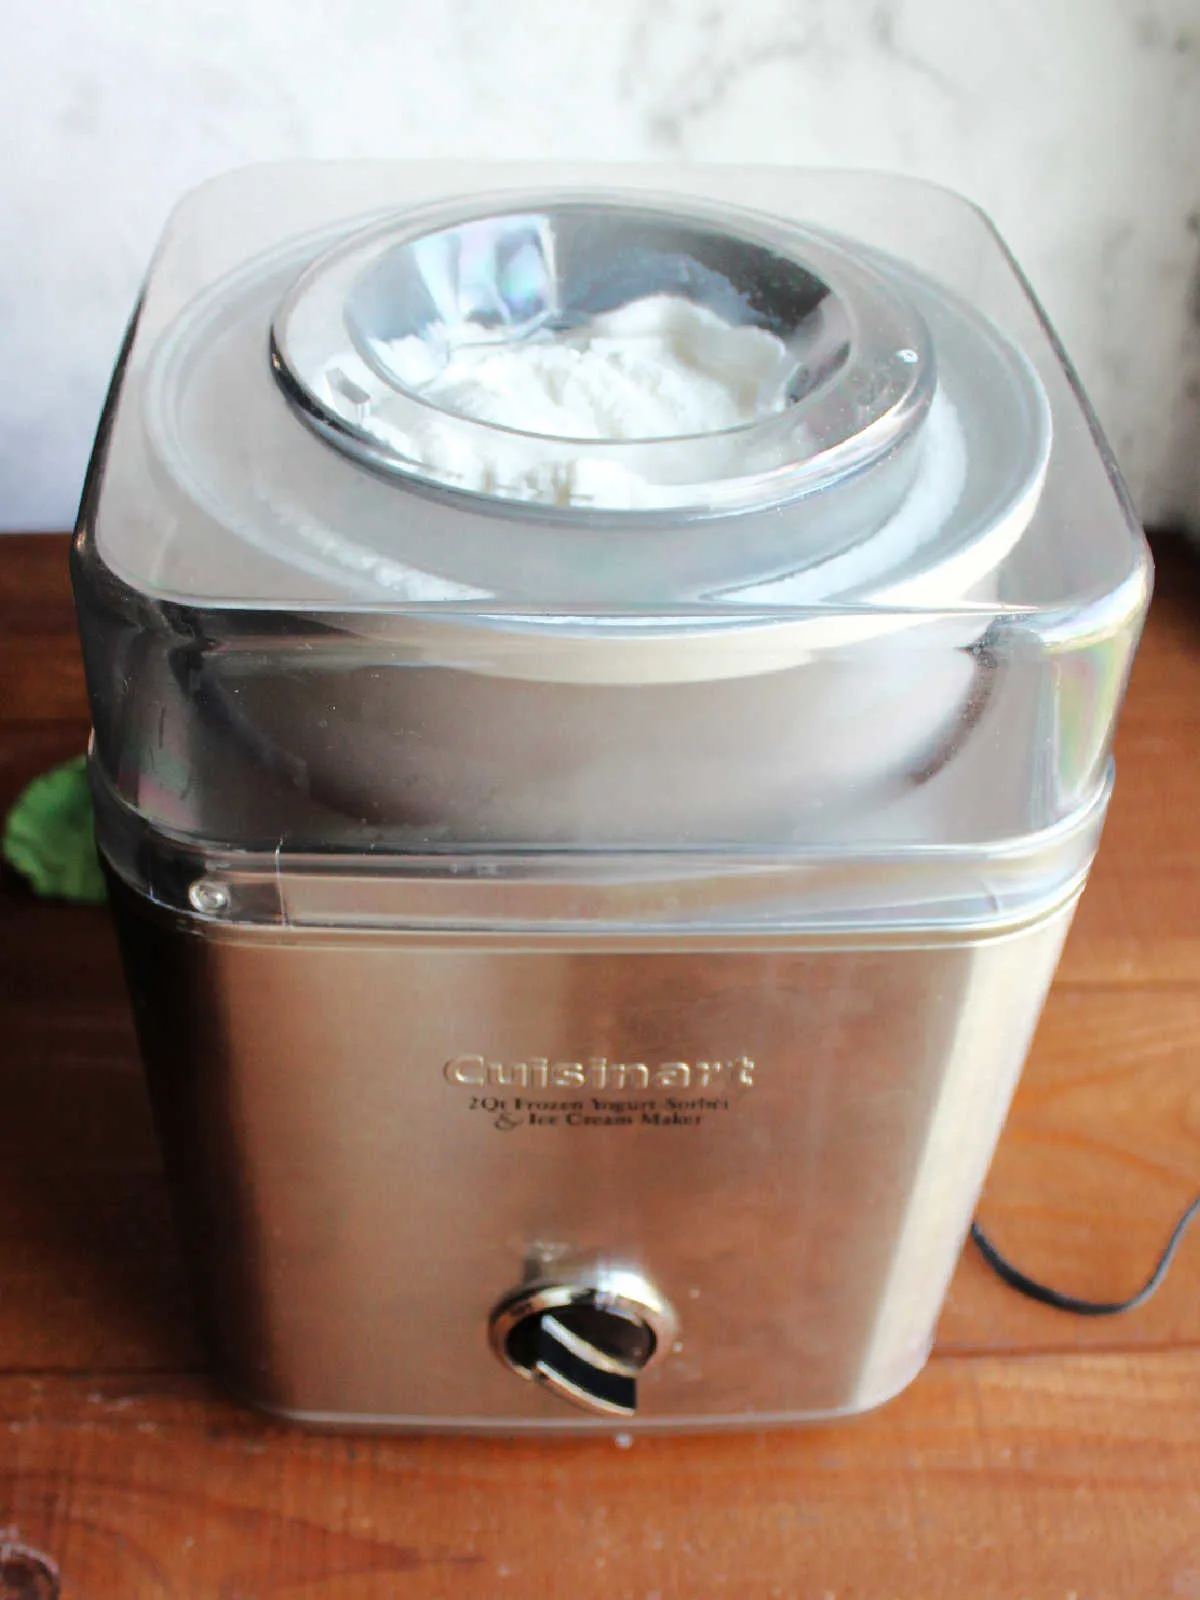 Ice cream maker with churned vanilla ice cream inside, ready to go into storage containers.